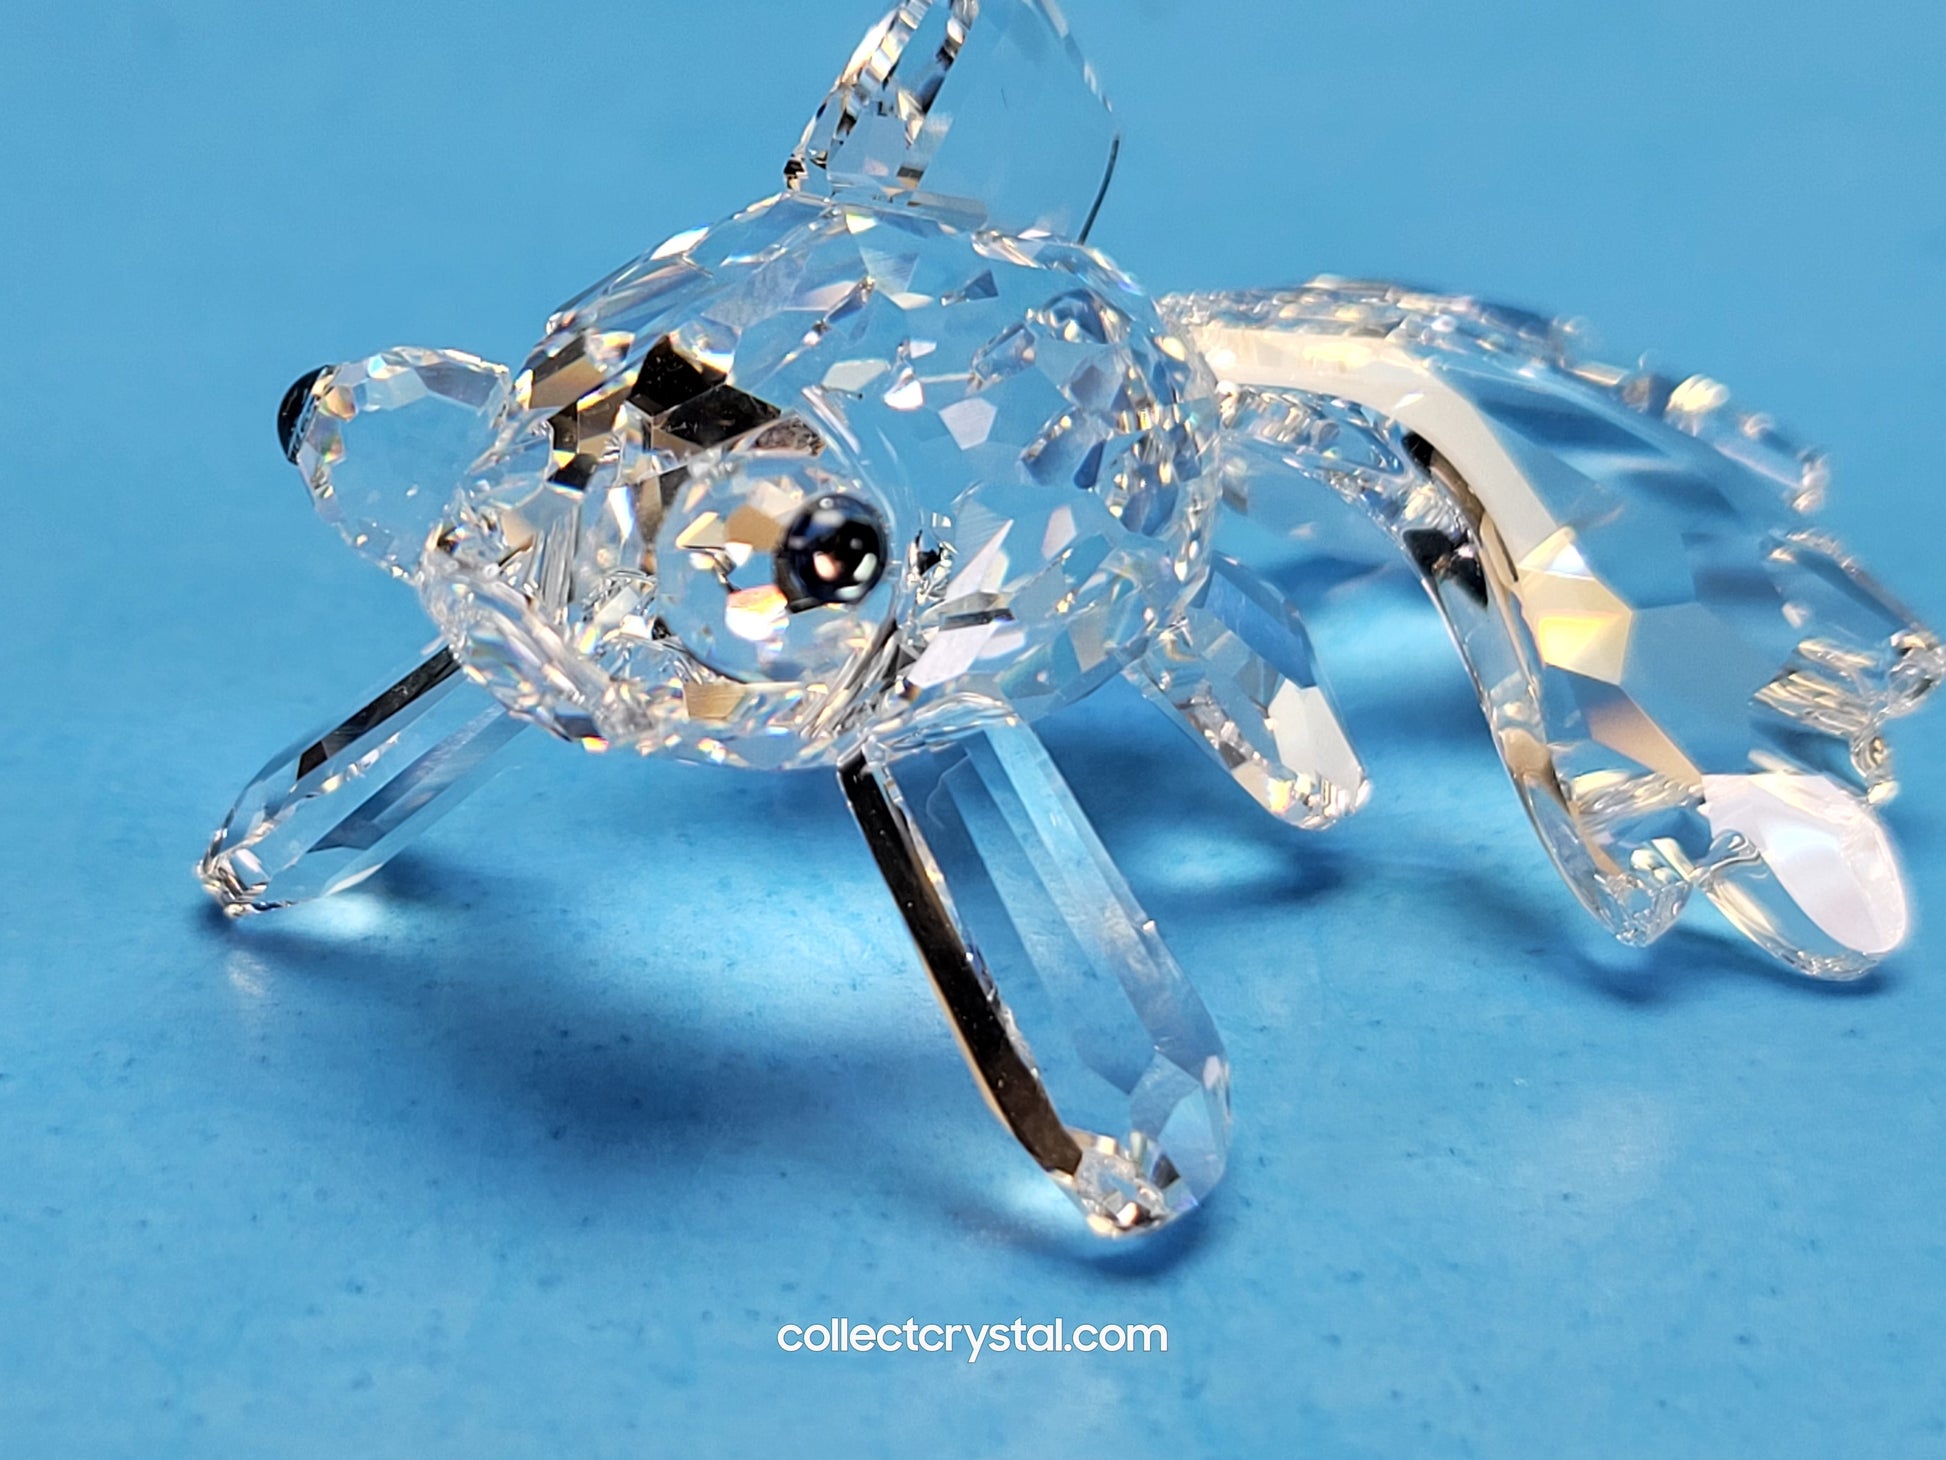 TELESCOPE FISH 631103 – Collect Crystal